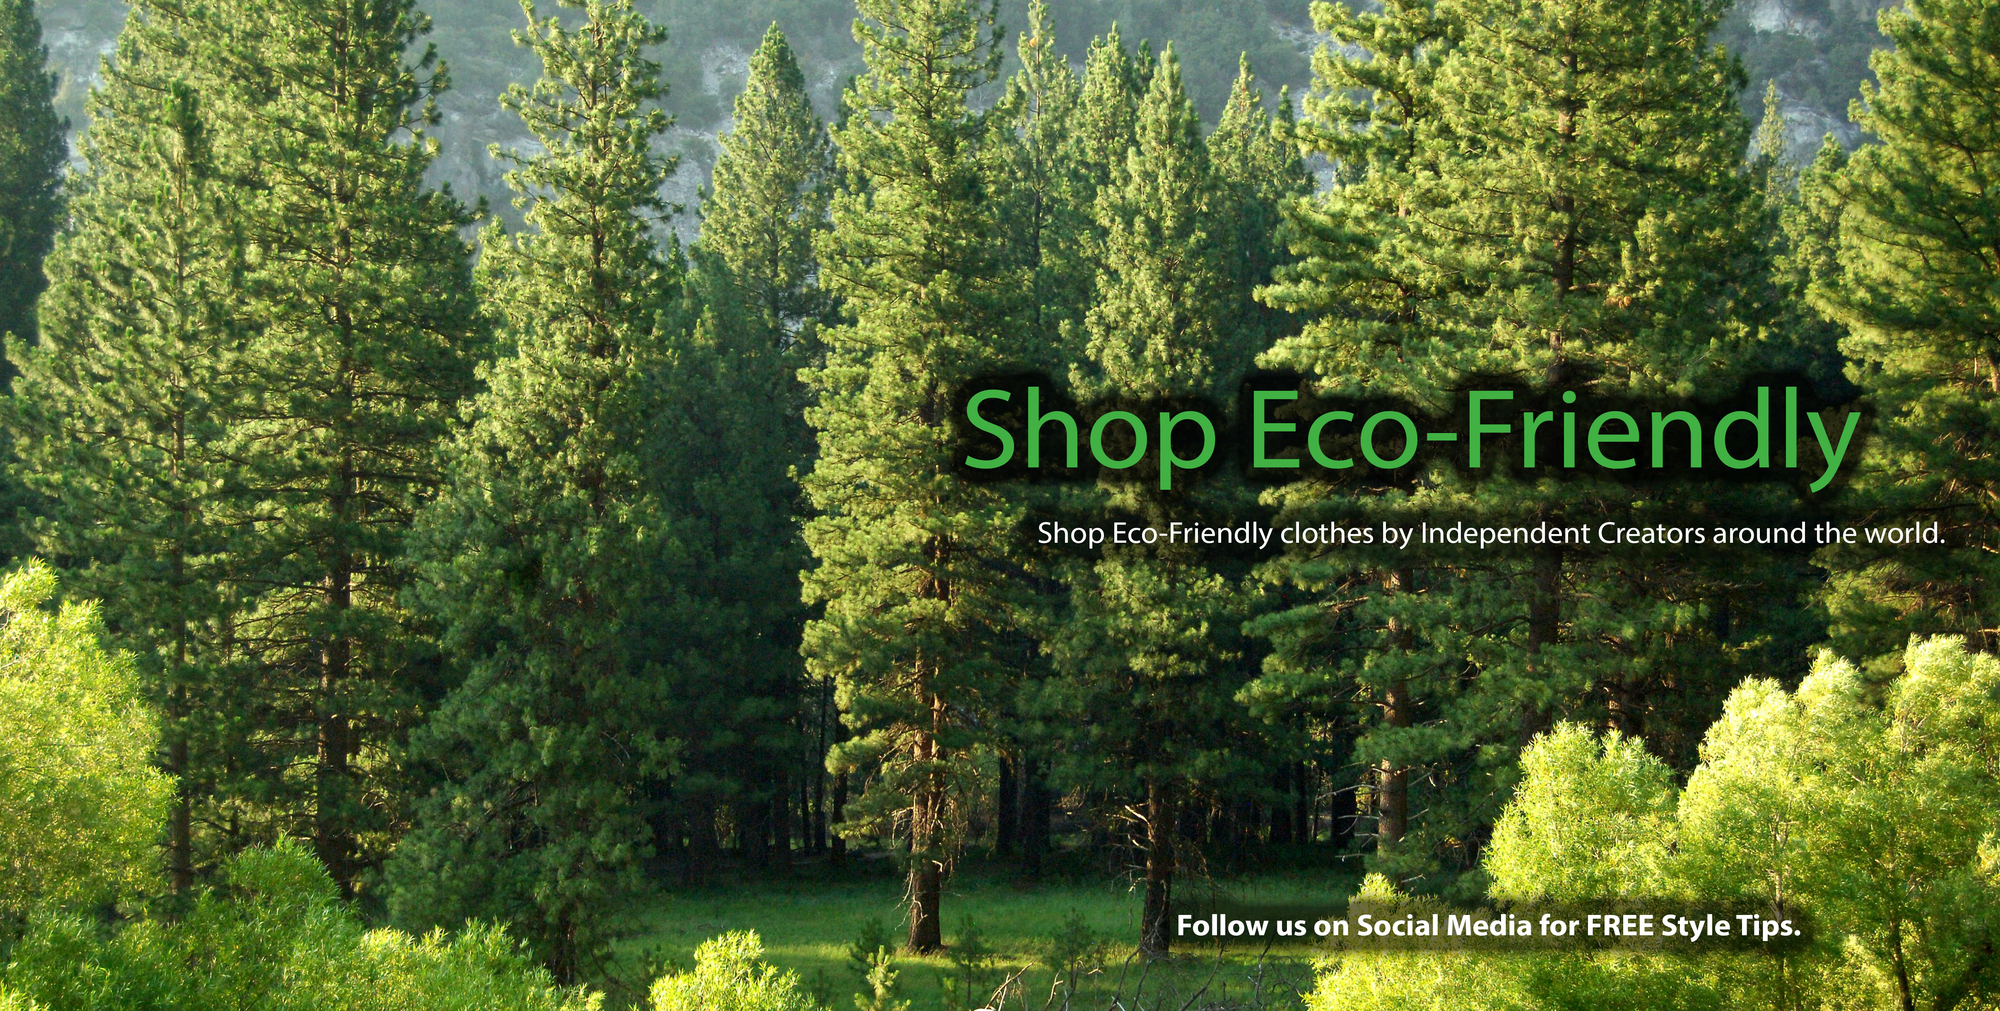 Shop and Buy Eco-Friendly Clothes